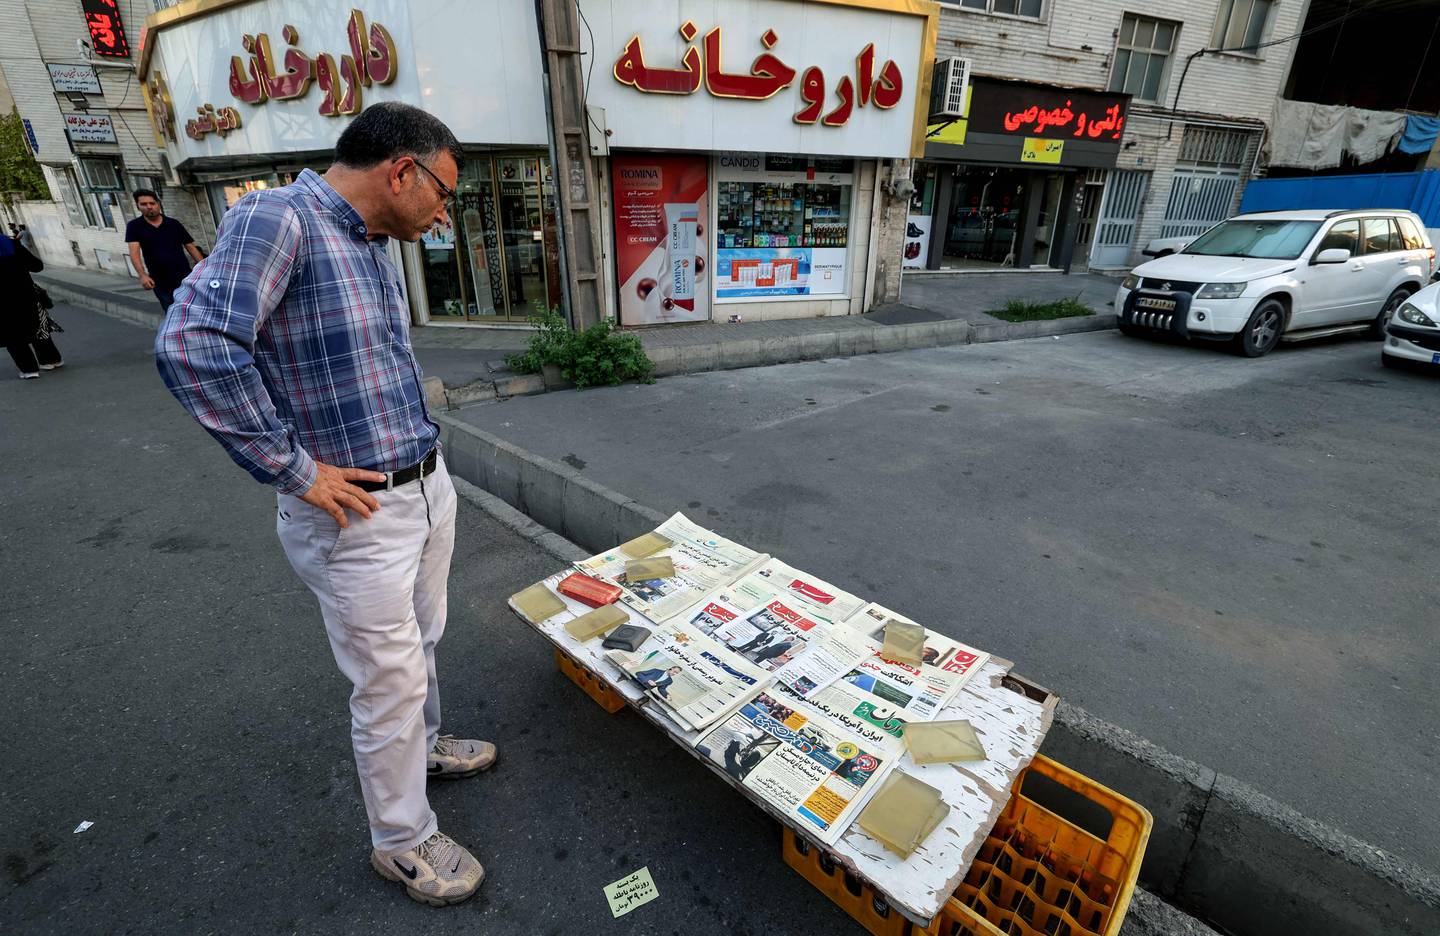 A man looks at a newspaper stall with a view of Etemad newspaper's front page bearing a title reading in Farsi "The night of the end of the JCPOA". AFP